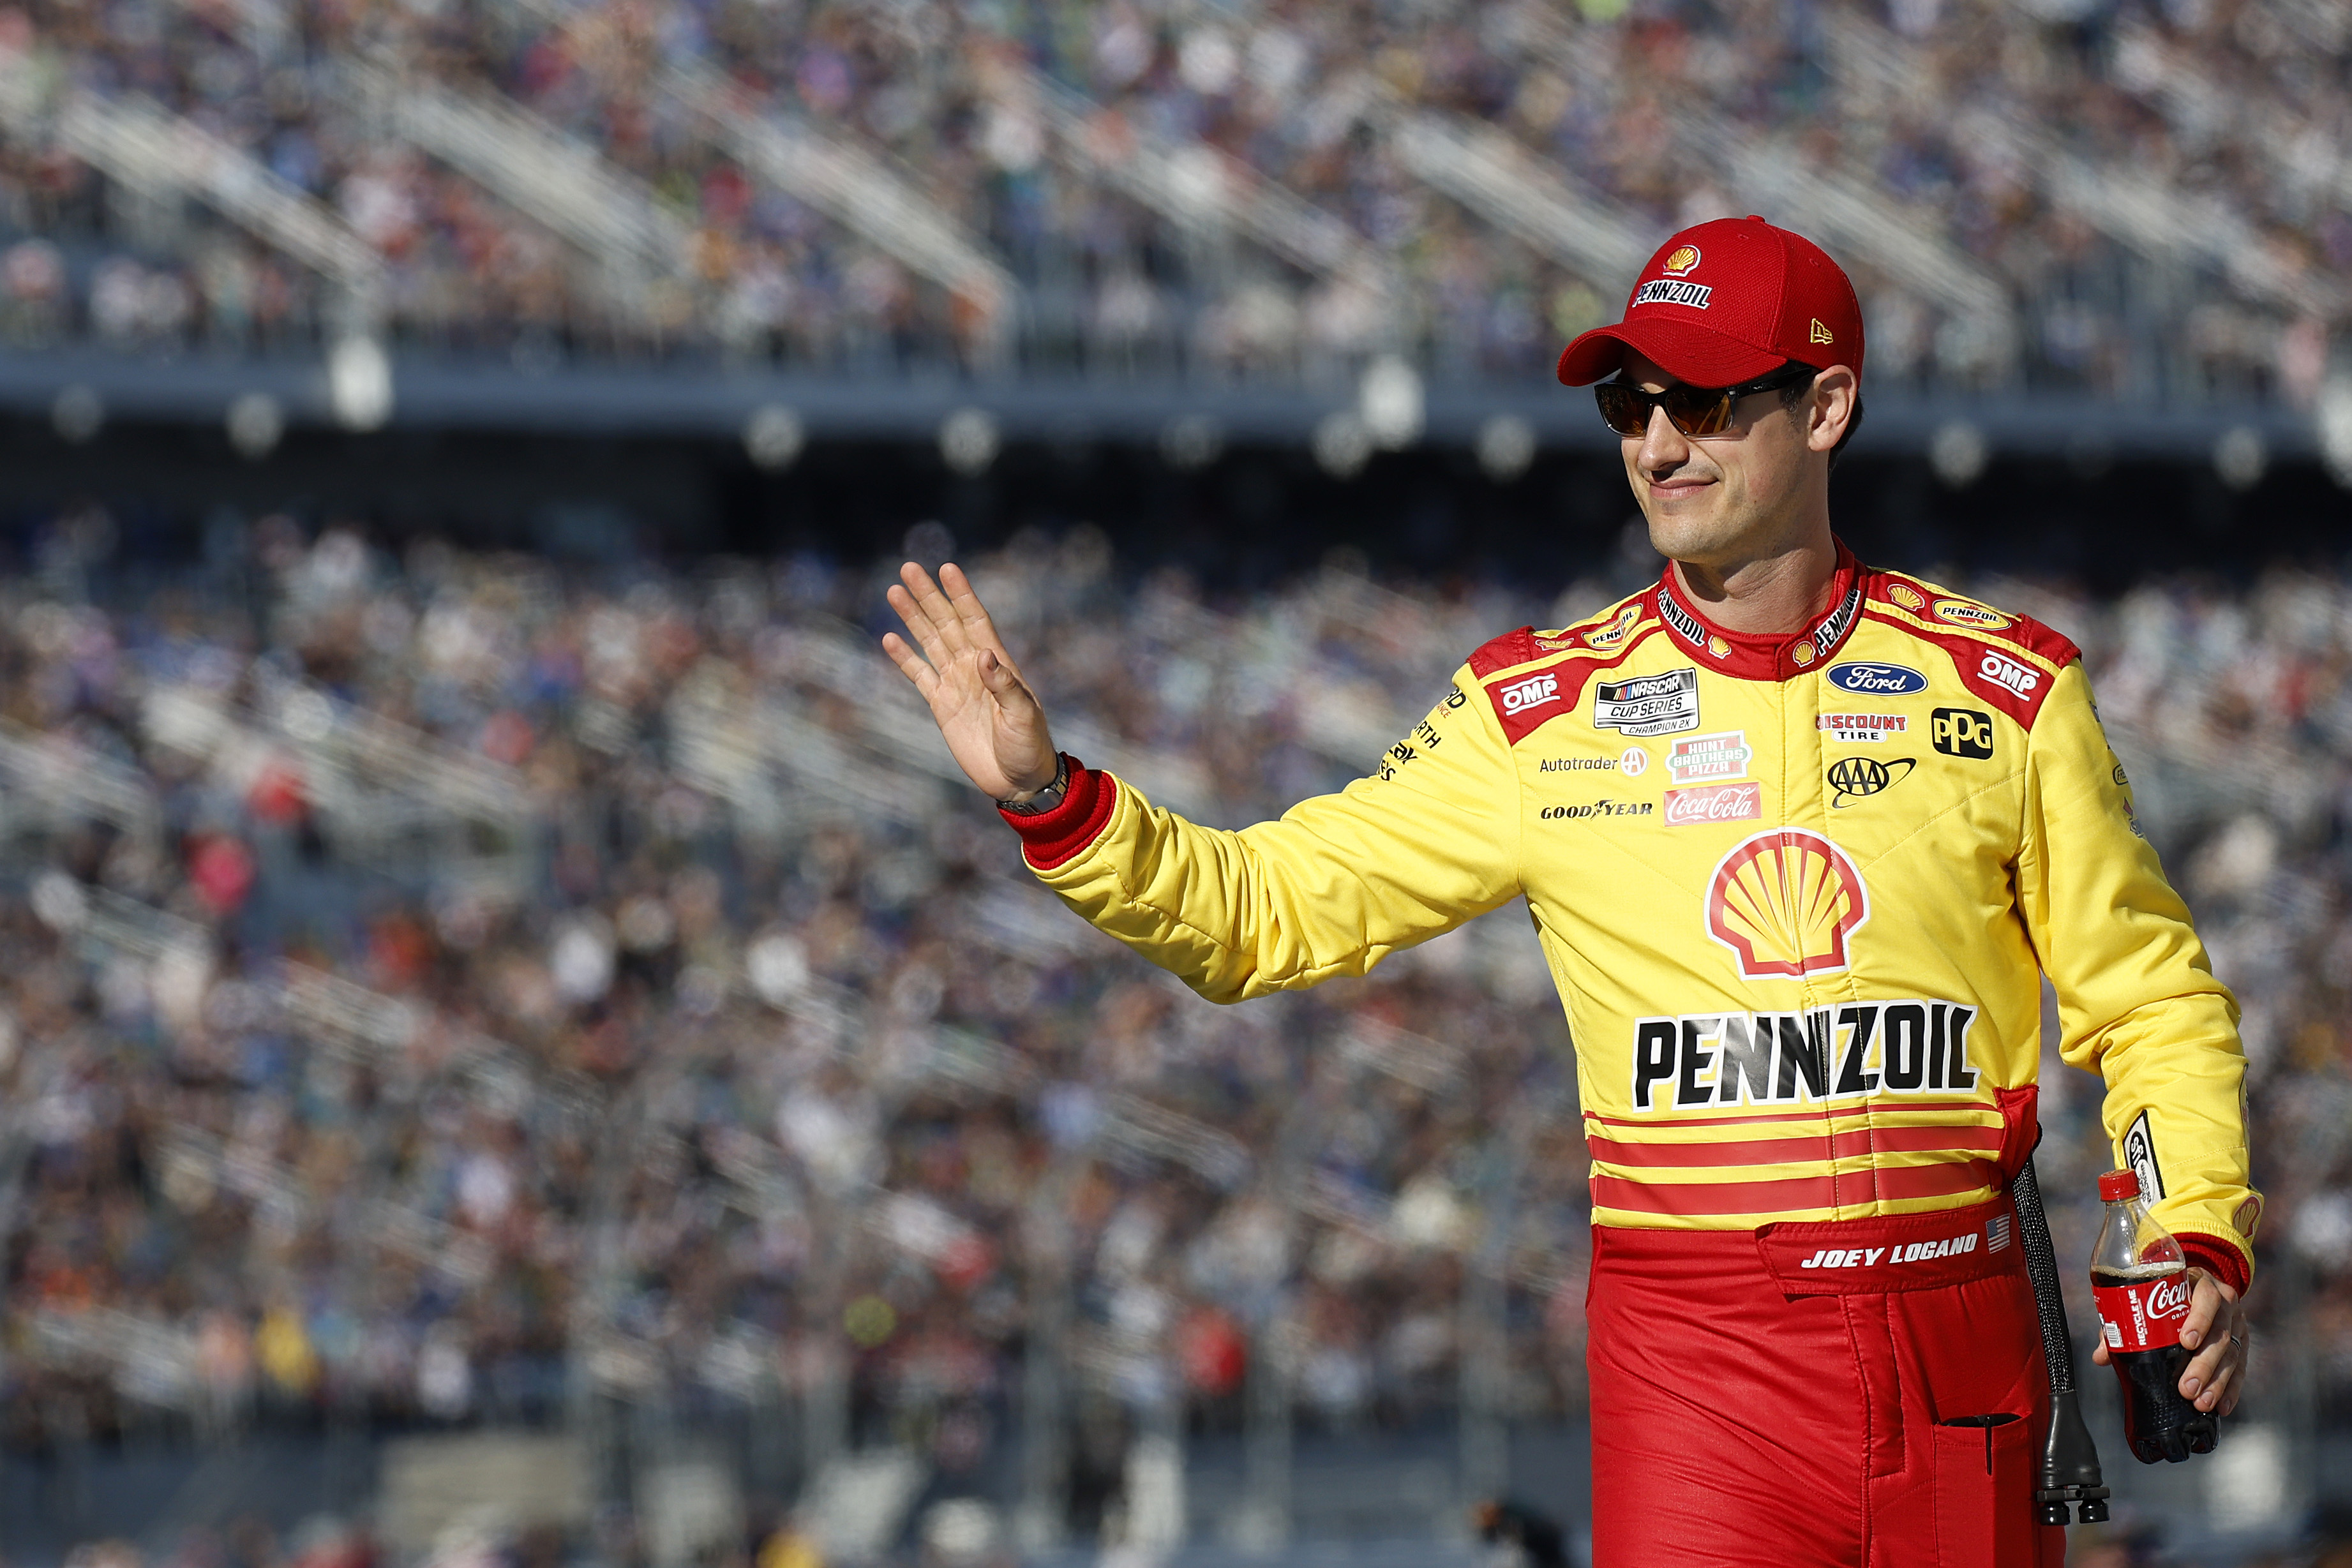 Joey Logano, driver of the #22 Shell Pennzoil Ford, waves to fans as he walks onstage during driver intros prior to the NASCAR Cup Series Daytona 500 at Daytona International Speedway on February 19, 2024 in Daytona Beach, Florida.